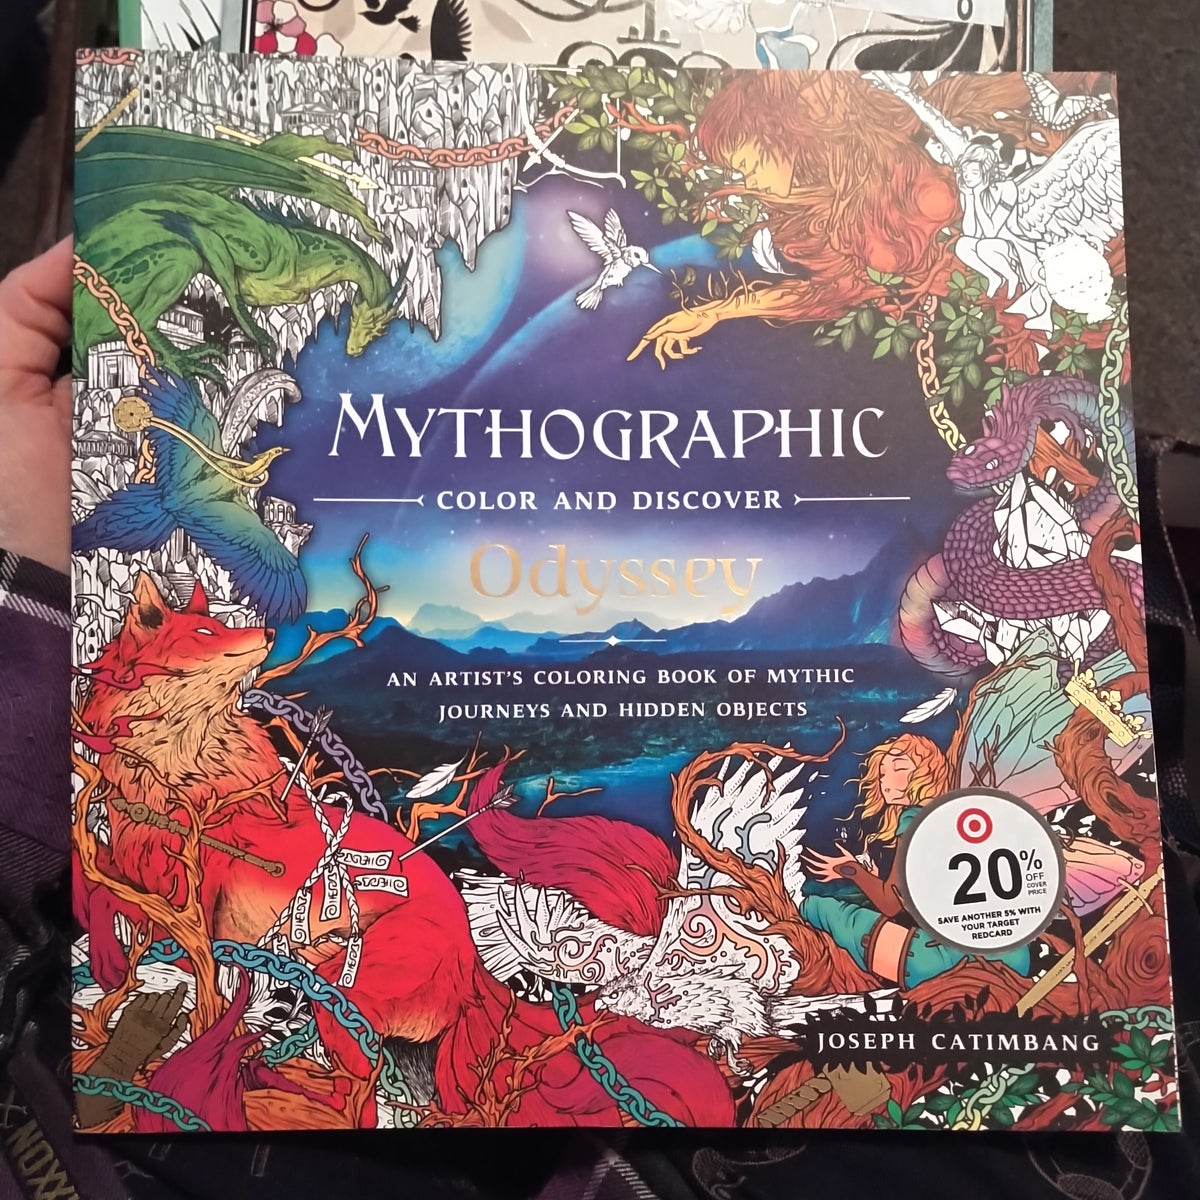 Mythographic Color and Discover: Odyssey by Joseph Catimbang, Paperback